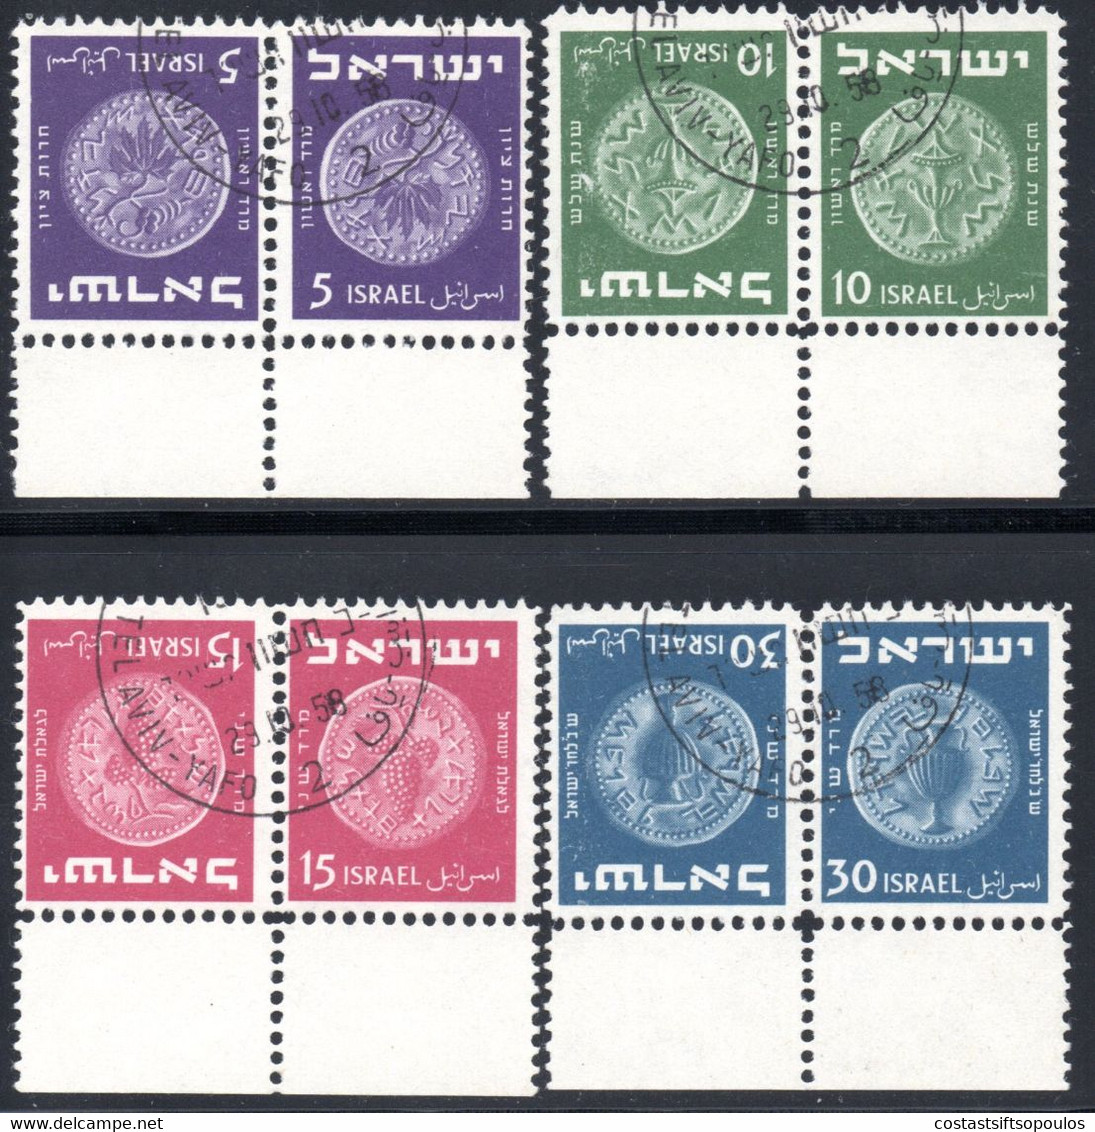 1080 ISRAEL 1949 COINS #21-26 GUTTER TETE BECHE AND TETE BECHE PAIRS,FINE USED - Gebraucht (ohne Tabs)